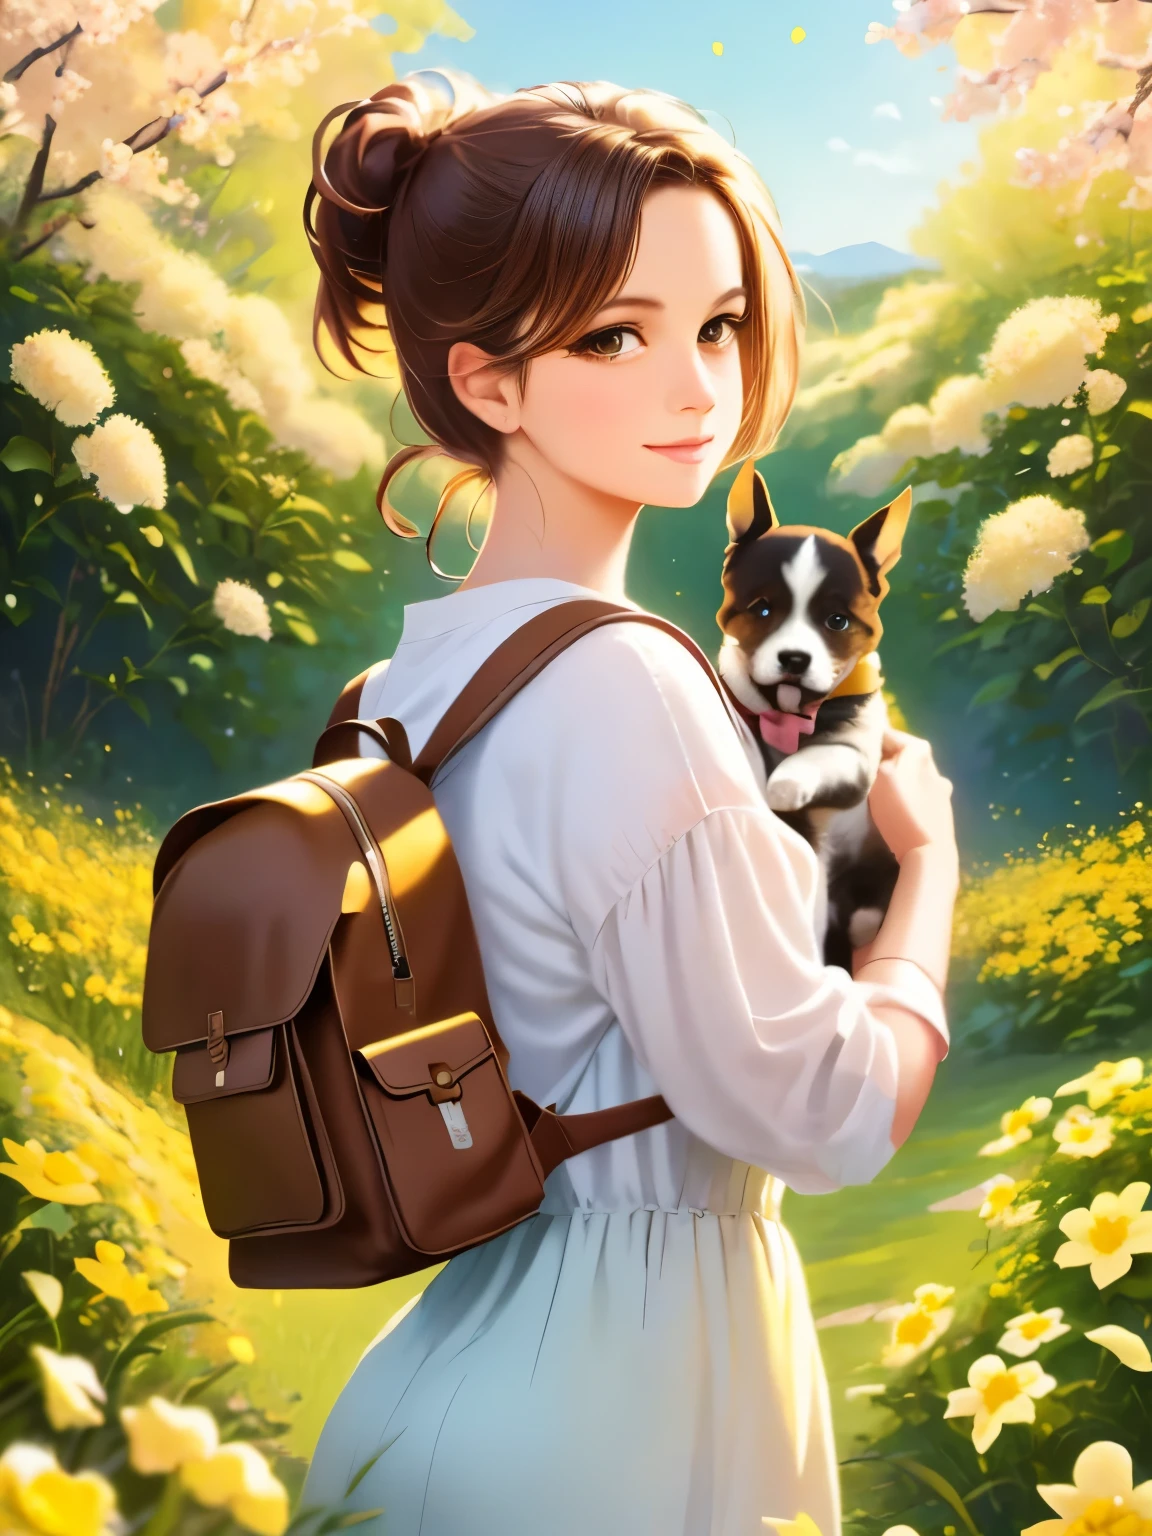 Tip: A very charming  with a backpack and her cute puppy enjoying a lovely spring outing surrounded by beautiful yellow flowers and nature. The illustration is a high-definition illustration in 4k resolution, featuring highly detailed facial features and cartoon-style visuals.  